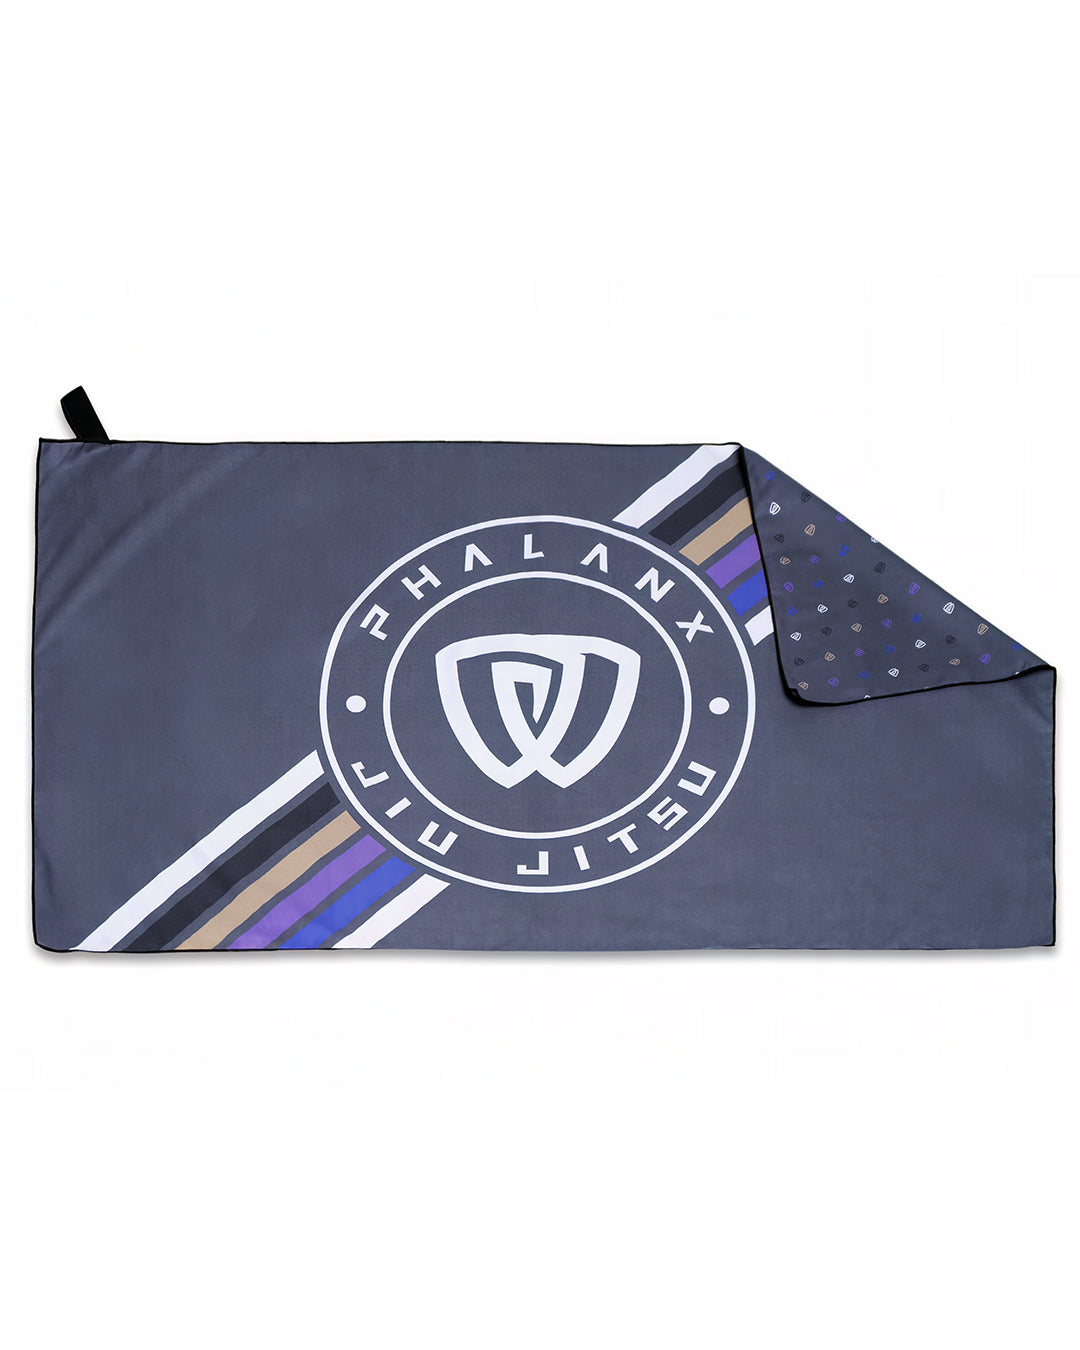 The Phalanx Shield Premium Gym Towel is everything you need to keep you dry during or after training. It's ultra-thin, compact, portable and versatile. Great for any physical activity where sweat or moisture is involved. Microfiber Suede Gym Towel High water absorption Quick Dry Durable Super decontamination Eco Friendly